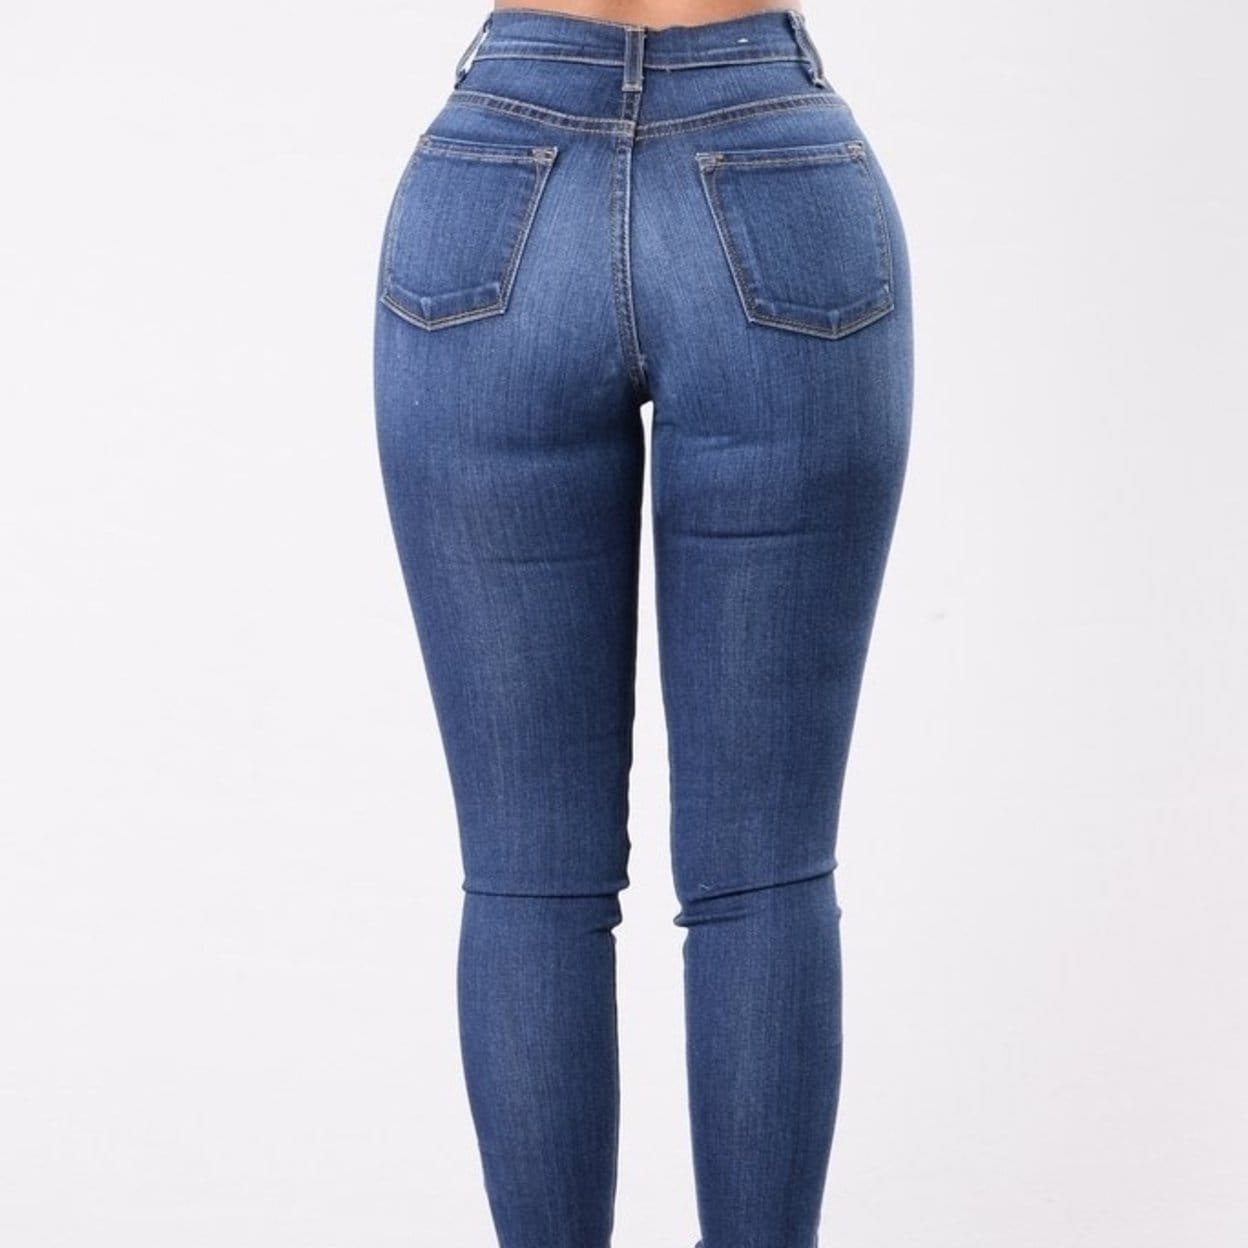 stretchy distressed jeans